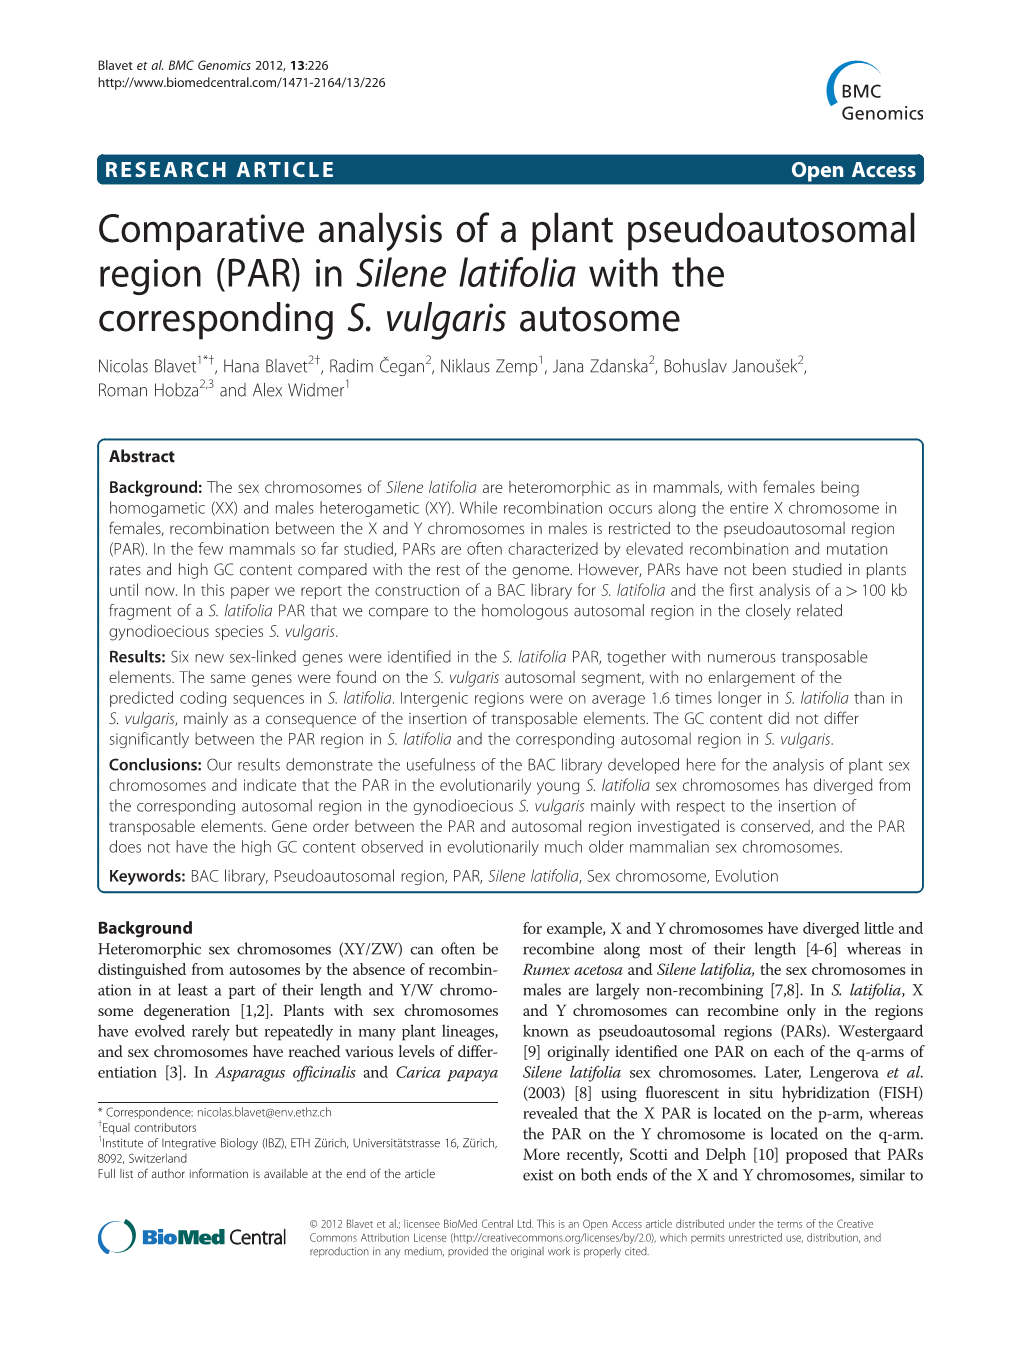 Comparative Analysis of a Plant Pseudoautosomal Region (PAR) in Silene Latifolia with the Corresponding S